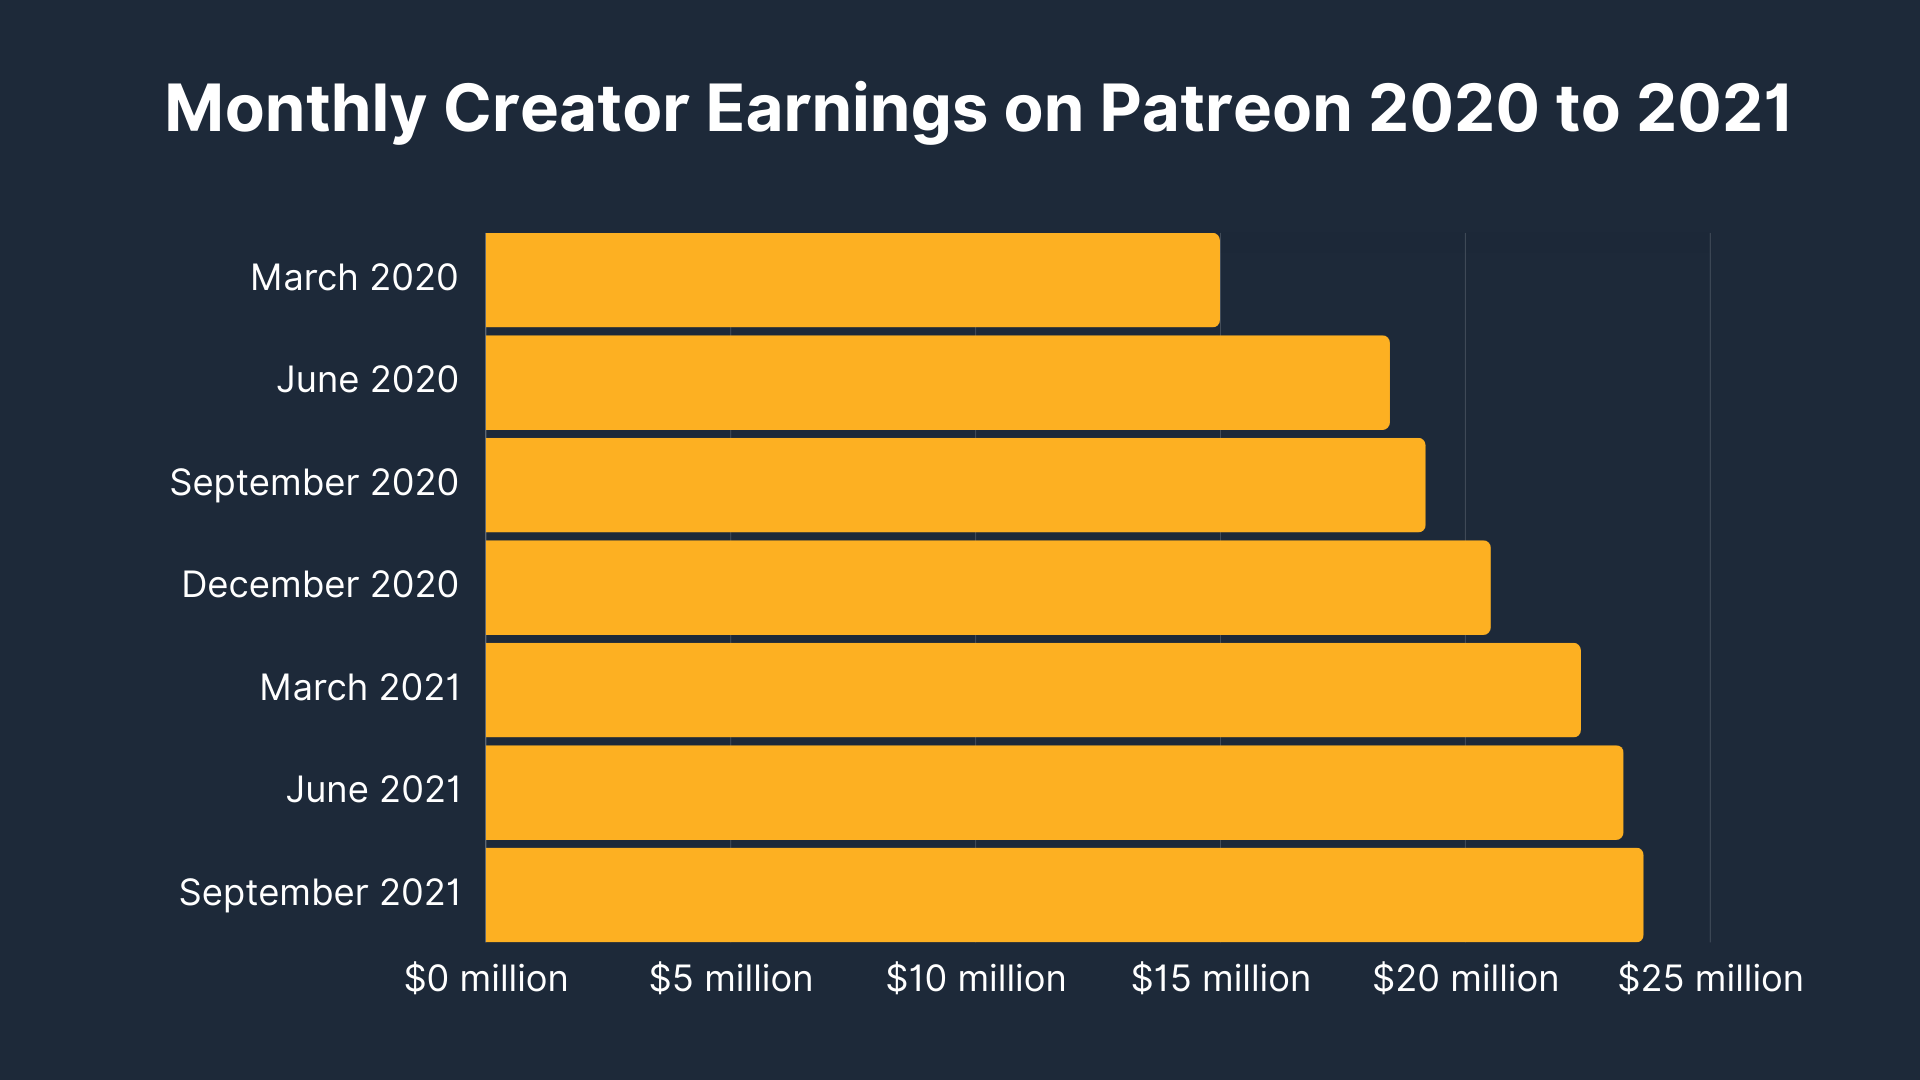 Monthly Creator Earnings on Patreon